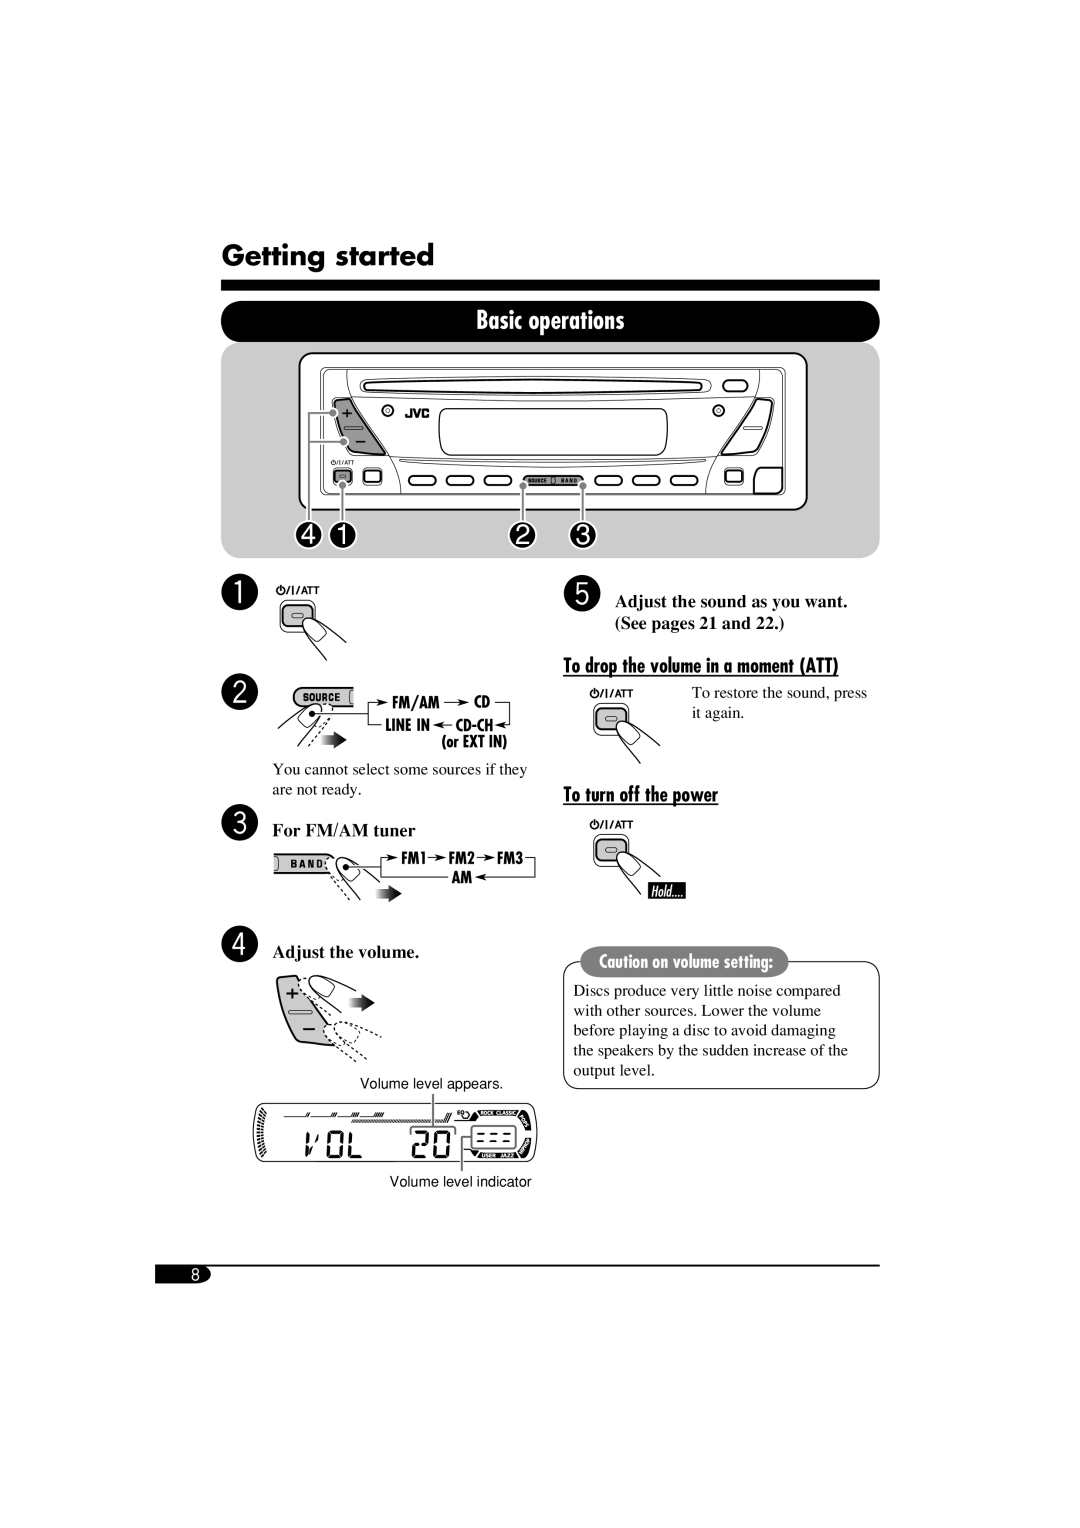 JVC KD-SV3104 manual Getting started, Basic operations, @ Adjust the sound as you want. See pages 21 and, For FM/AM tuner 